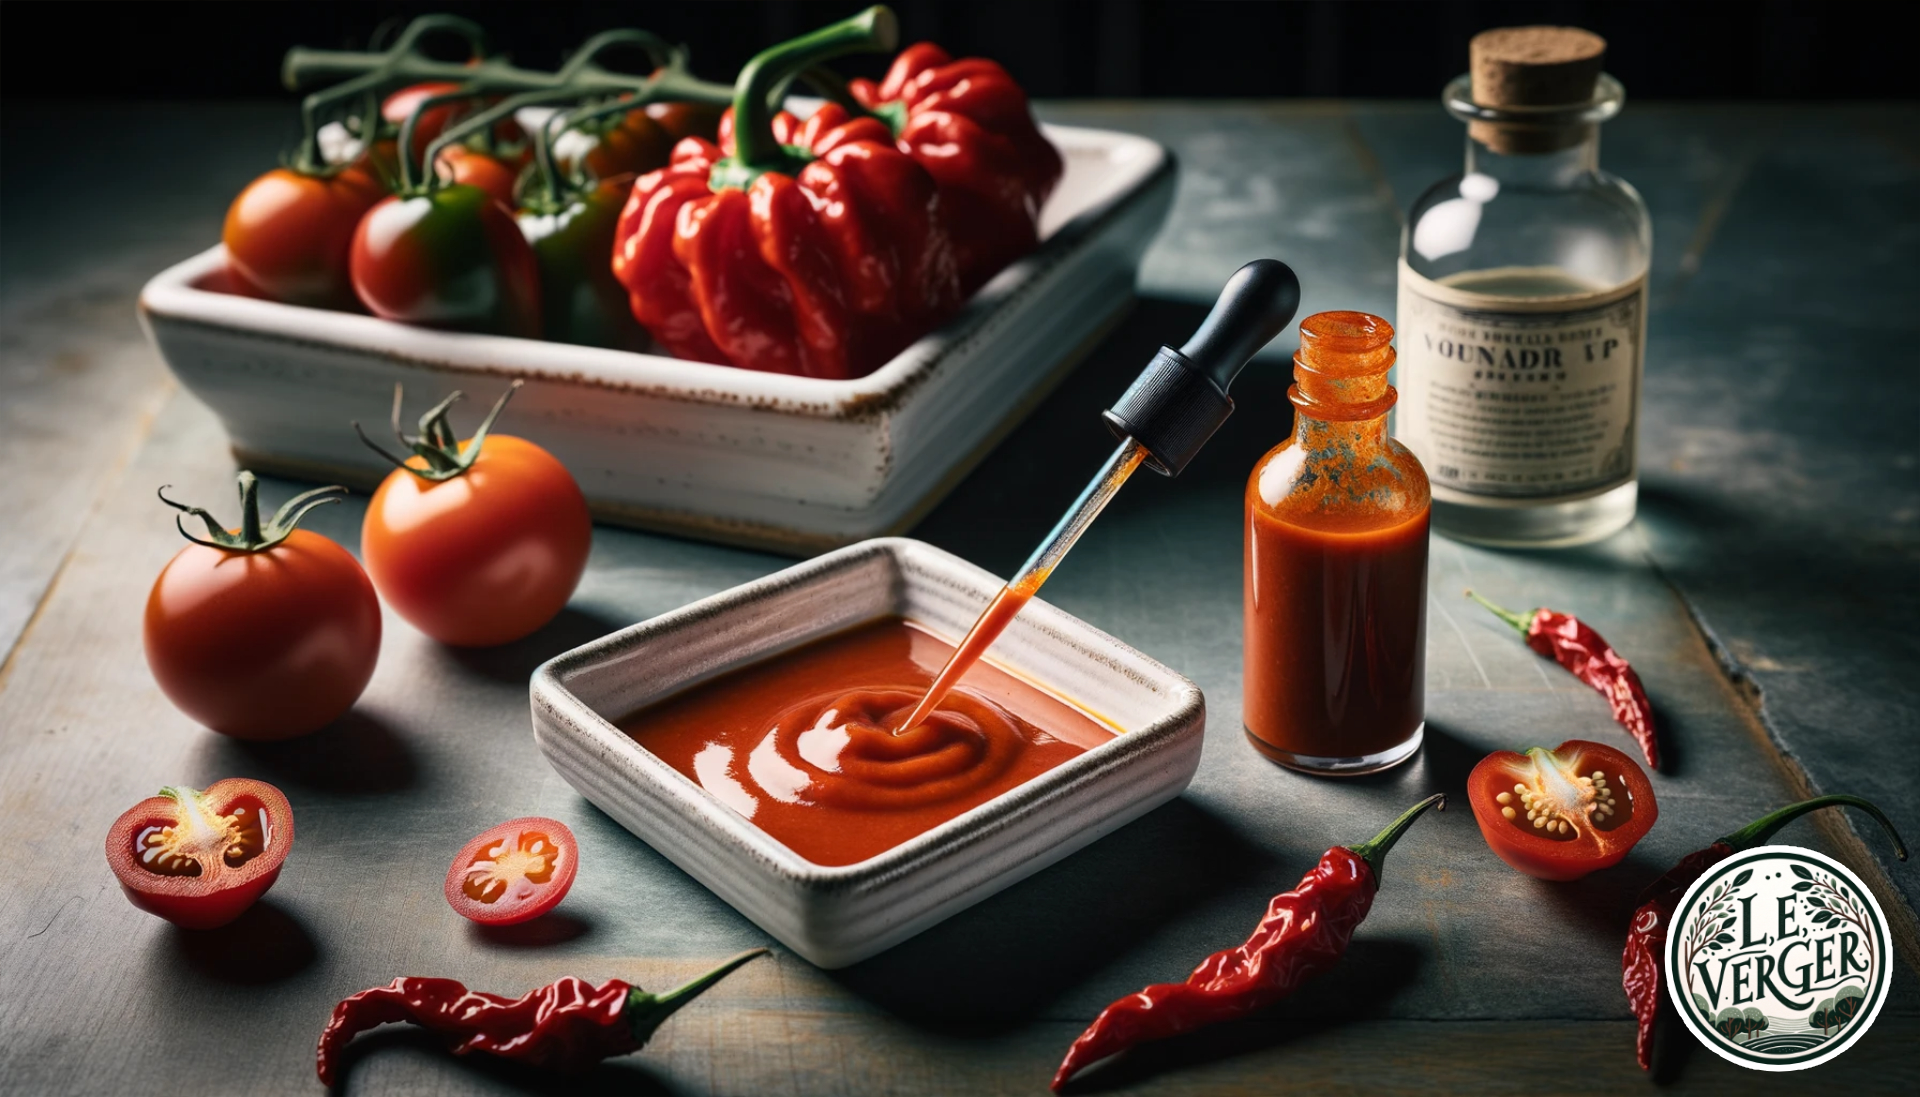 Photo showcasing Ultra-Hot Sauce in a high-end British culinary setting. A ceramic white dish holds a small quantity of the sauce, emphasising its fiery red colour. Next to the dish is a pipette, filled with the sauce, hinting at its potency and the caution needed in its use. Carolina Reaper peppers, recognised as the world's hottest, are placed strategically around, with slices of fresh tomatoes. A vintage vinegar bottle sits subtly in the background, all under the glow of ambient light.